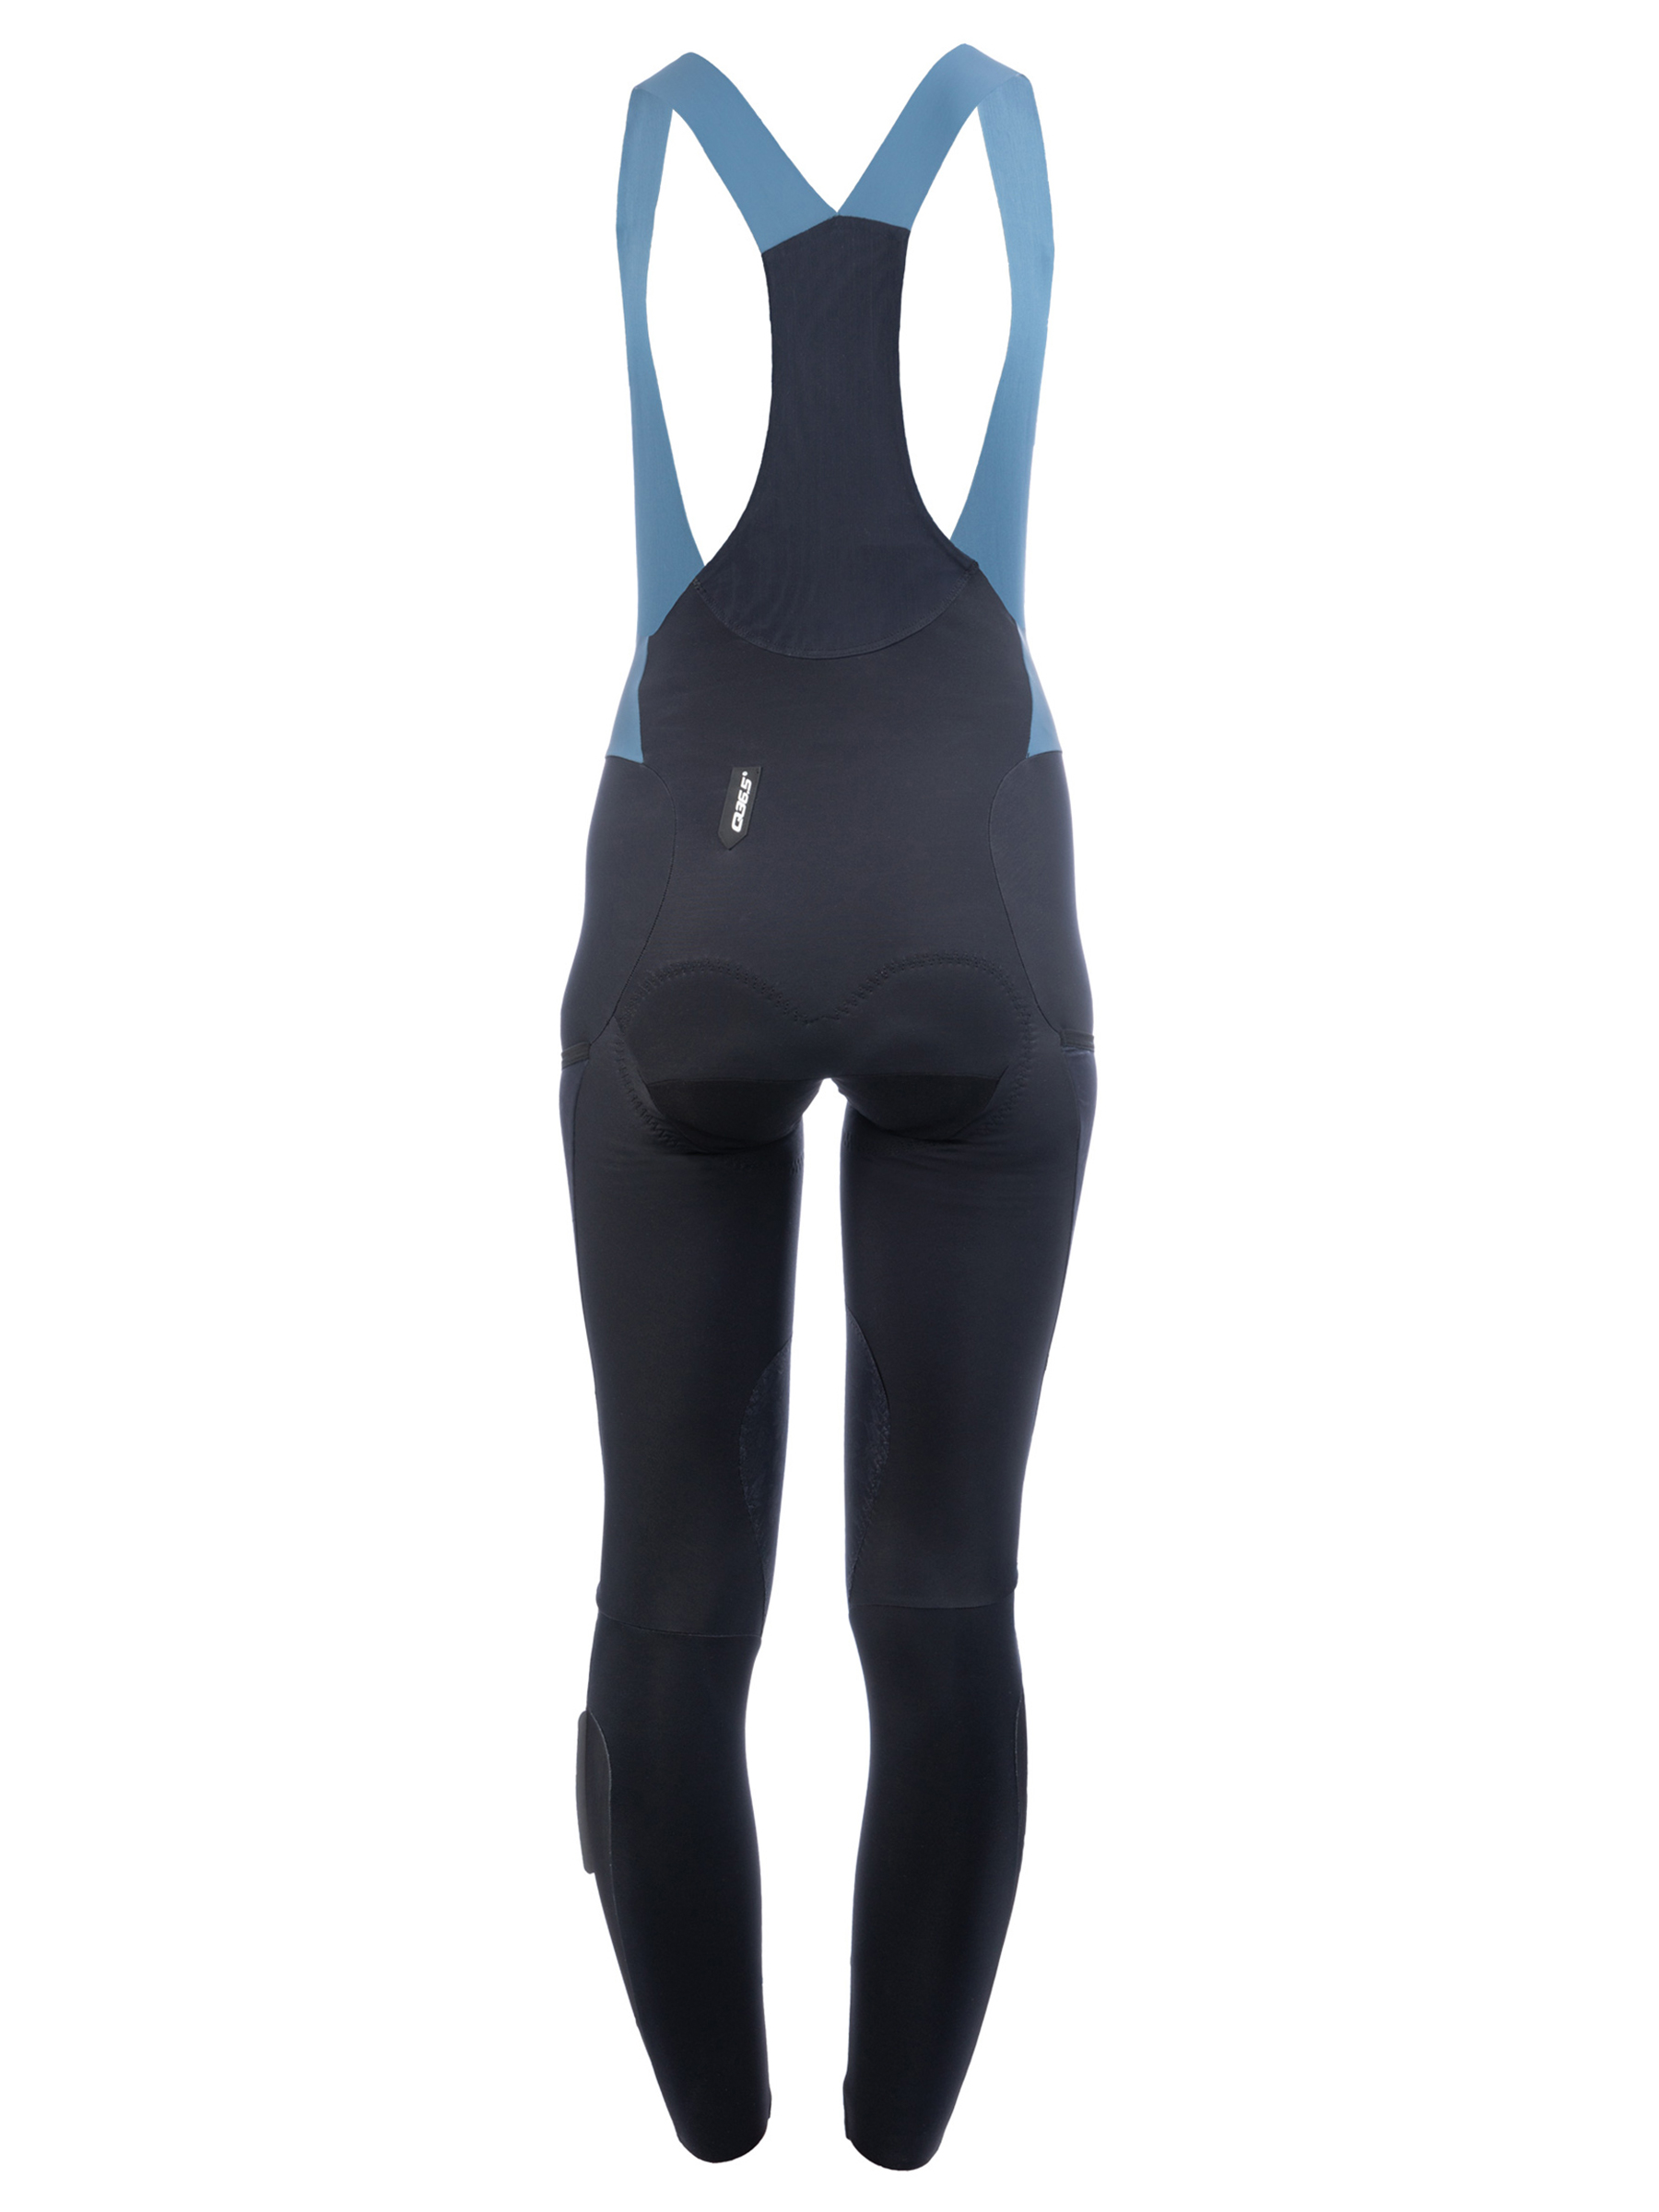 Women's Pro Team Winter Tights  Cycling Tights For Riding In Cold